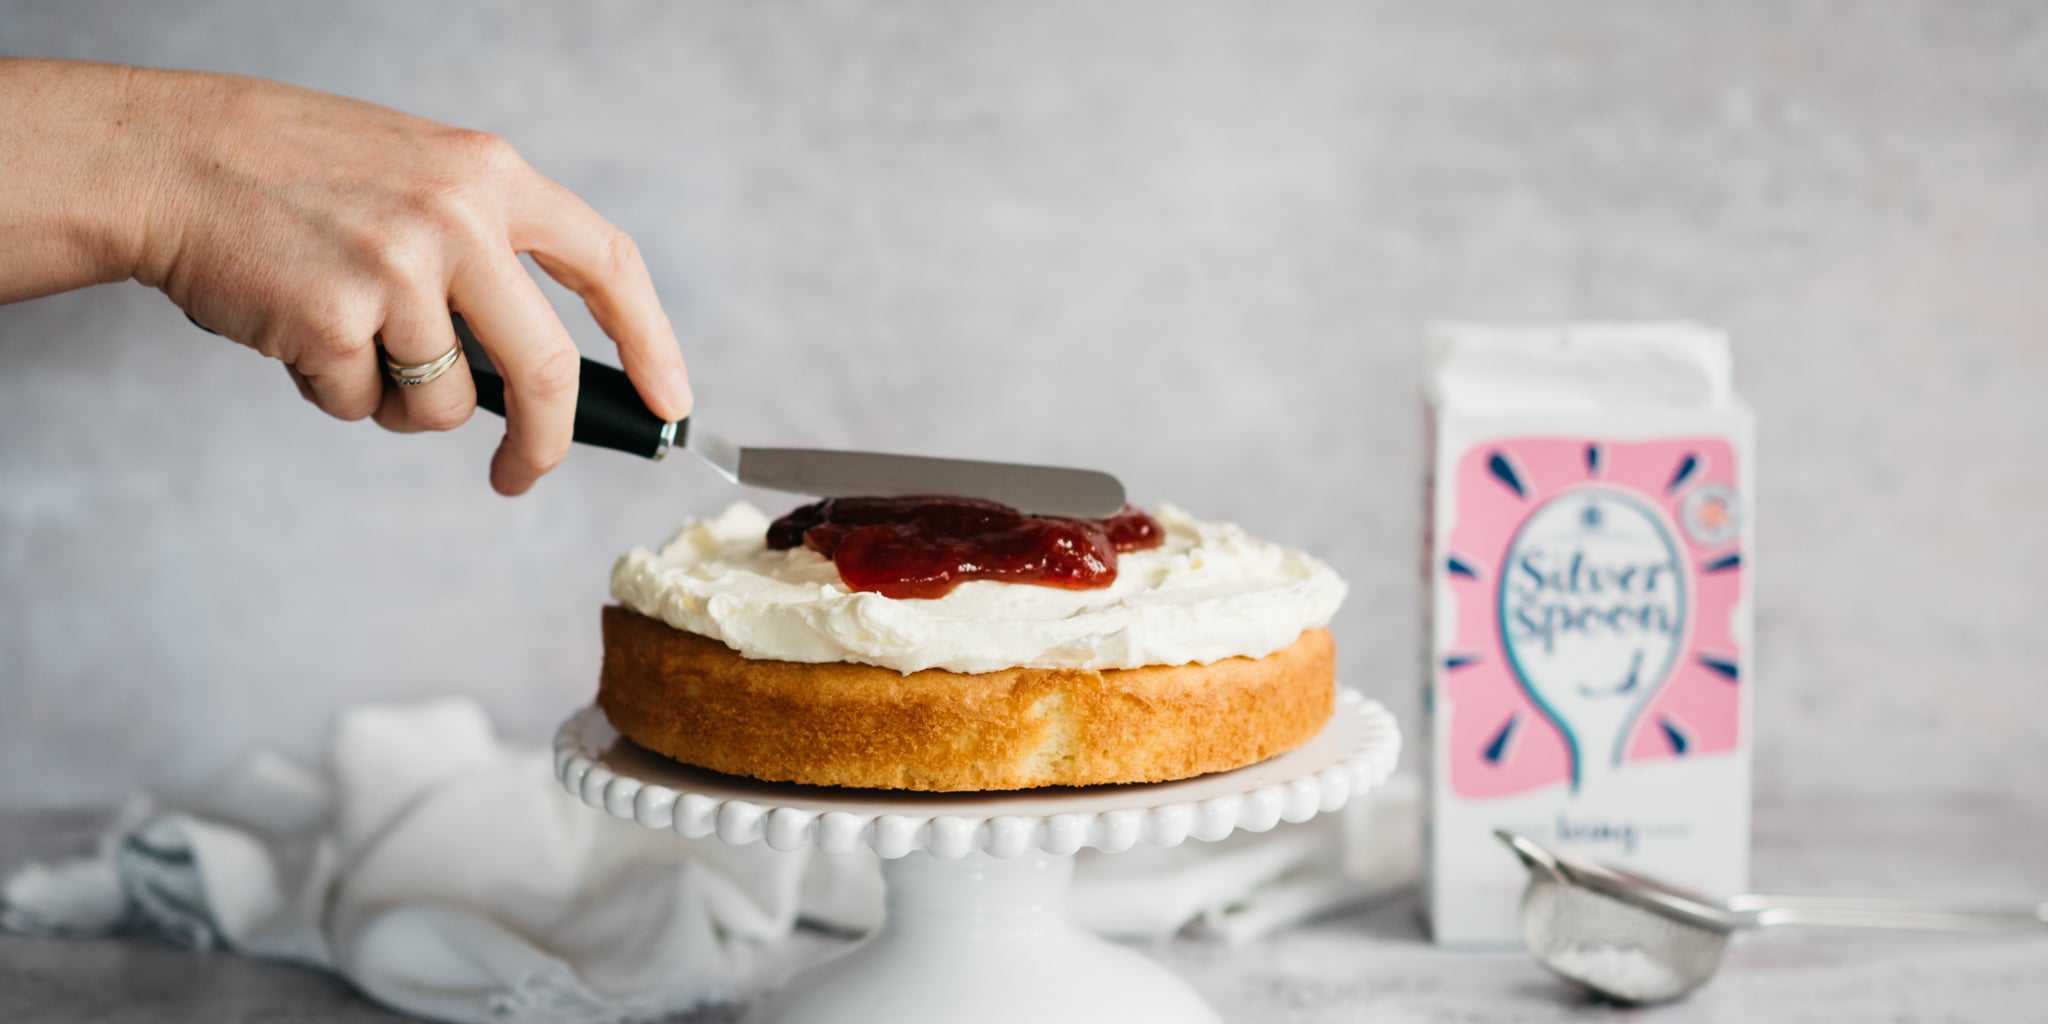 Hand using an offset spatula to spread a layer of jam and cream between the layers of the Gluten Free Victoria Sponge, with a box of Silver Spoon Icing Sugar in the background